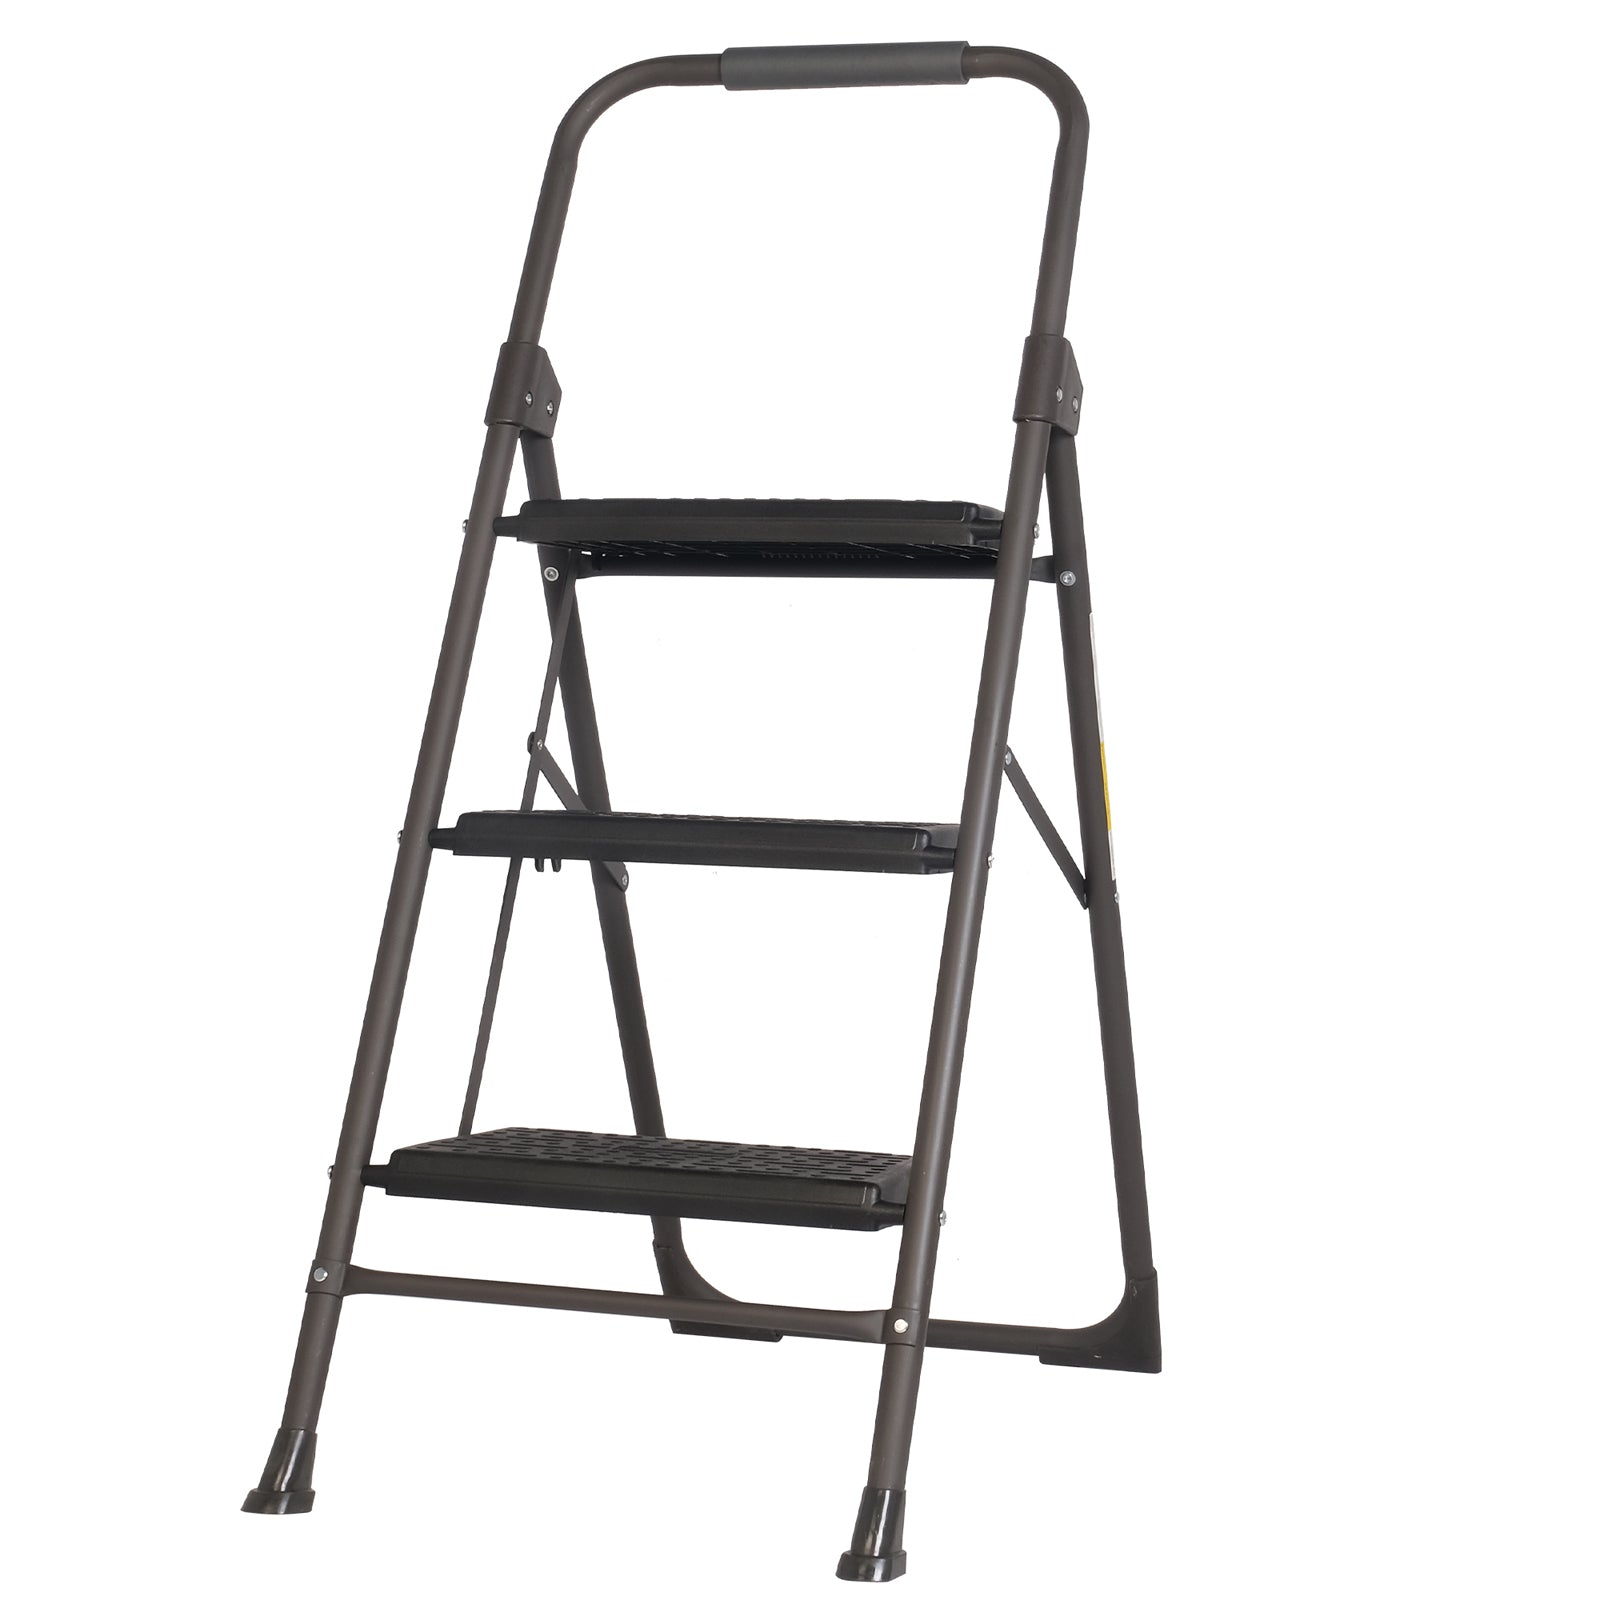 3 Step Portable Folding Ladder Step Stool with Wide Anti-Slip Pedal and Handgrip